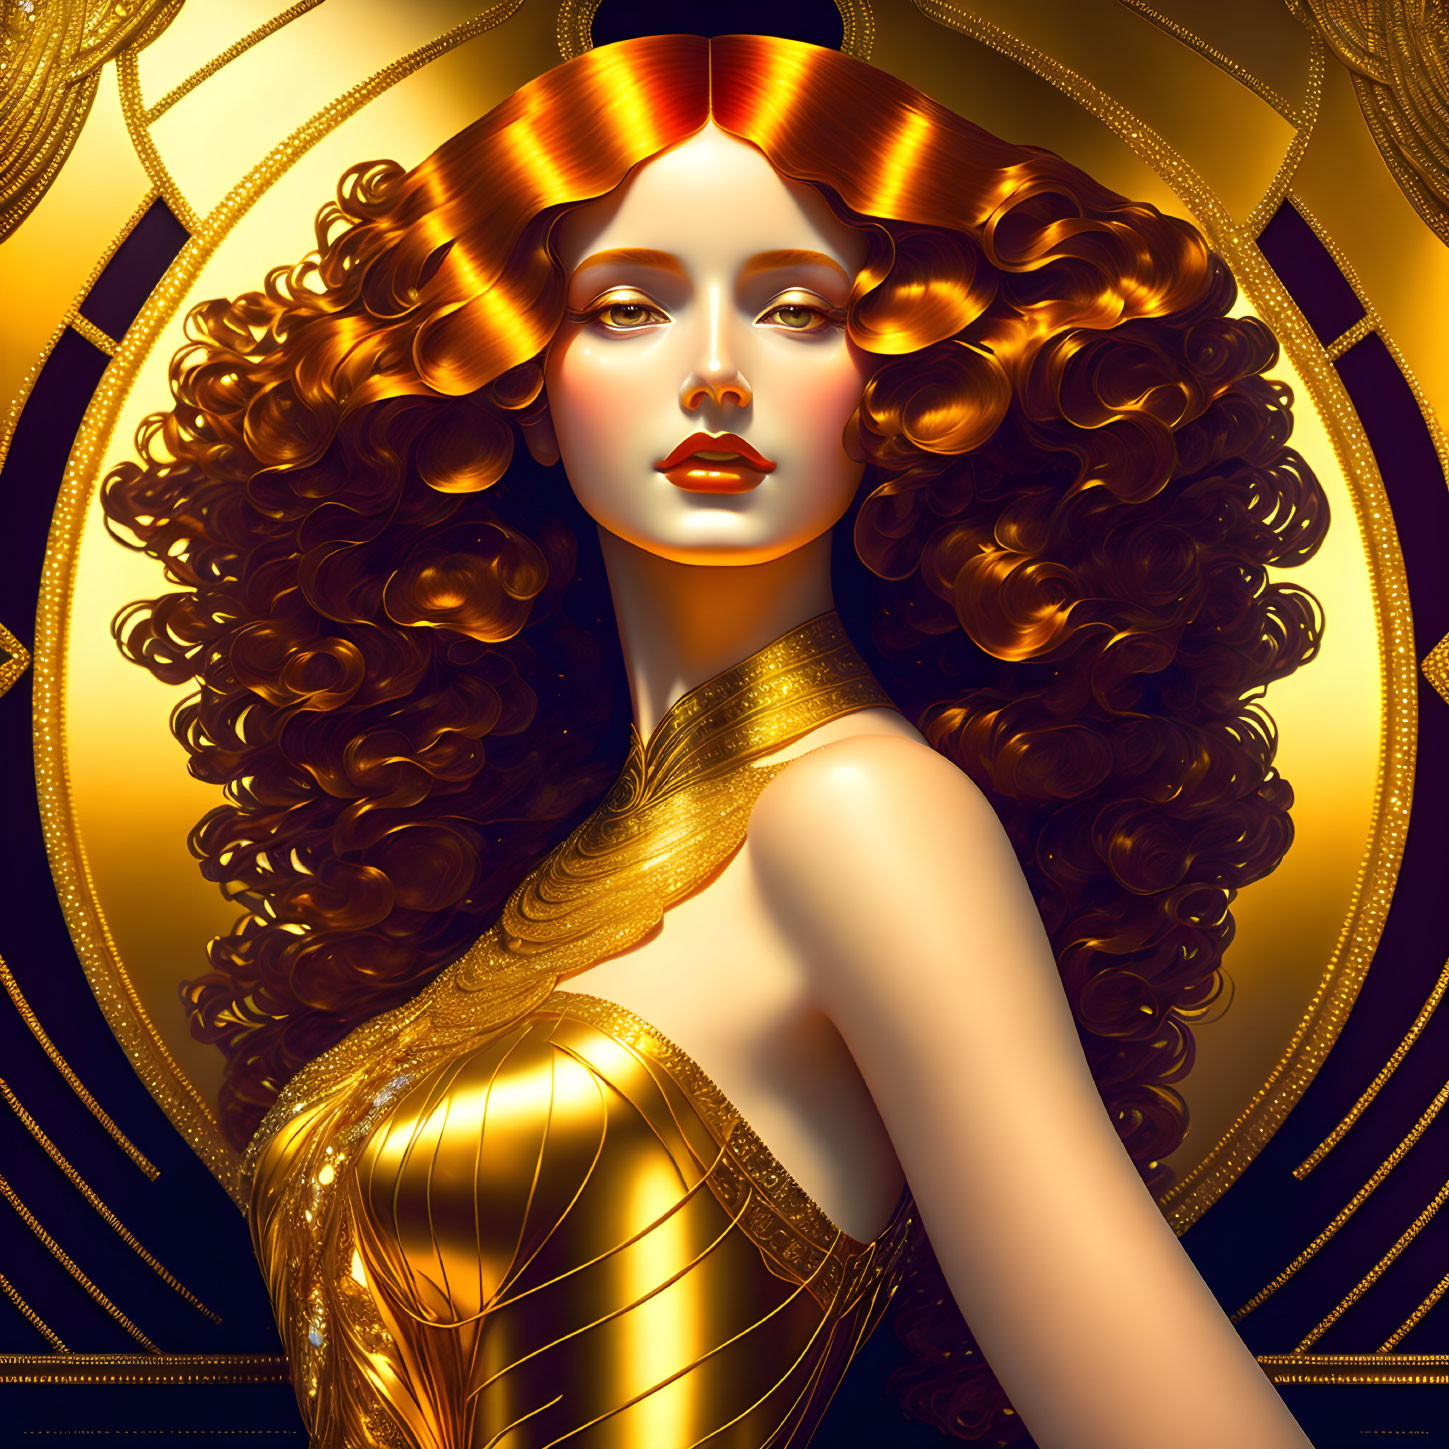 Voluminous Curly Red Hair Woman Portrait on Ornate Golden Art Deco Background